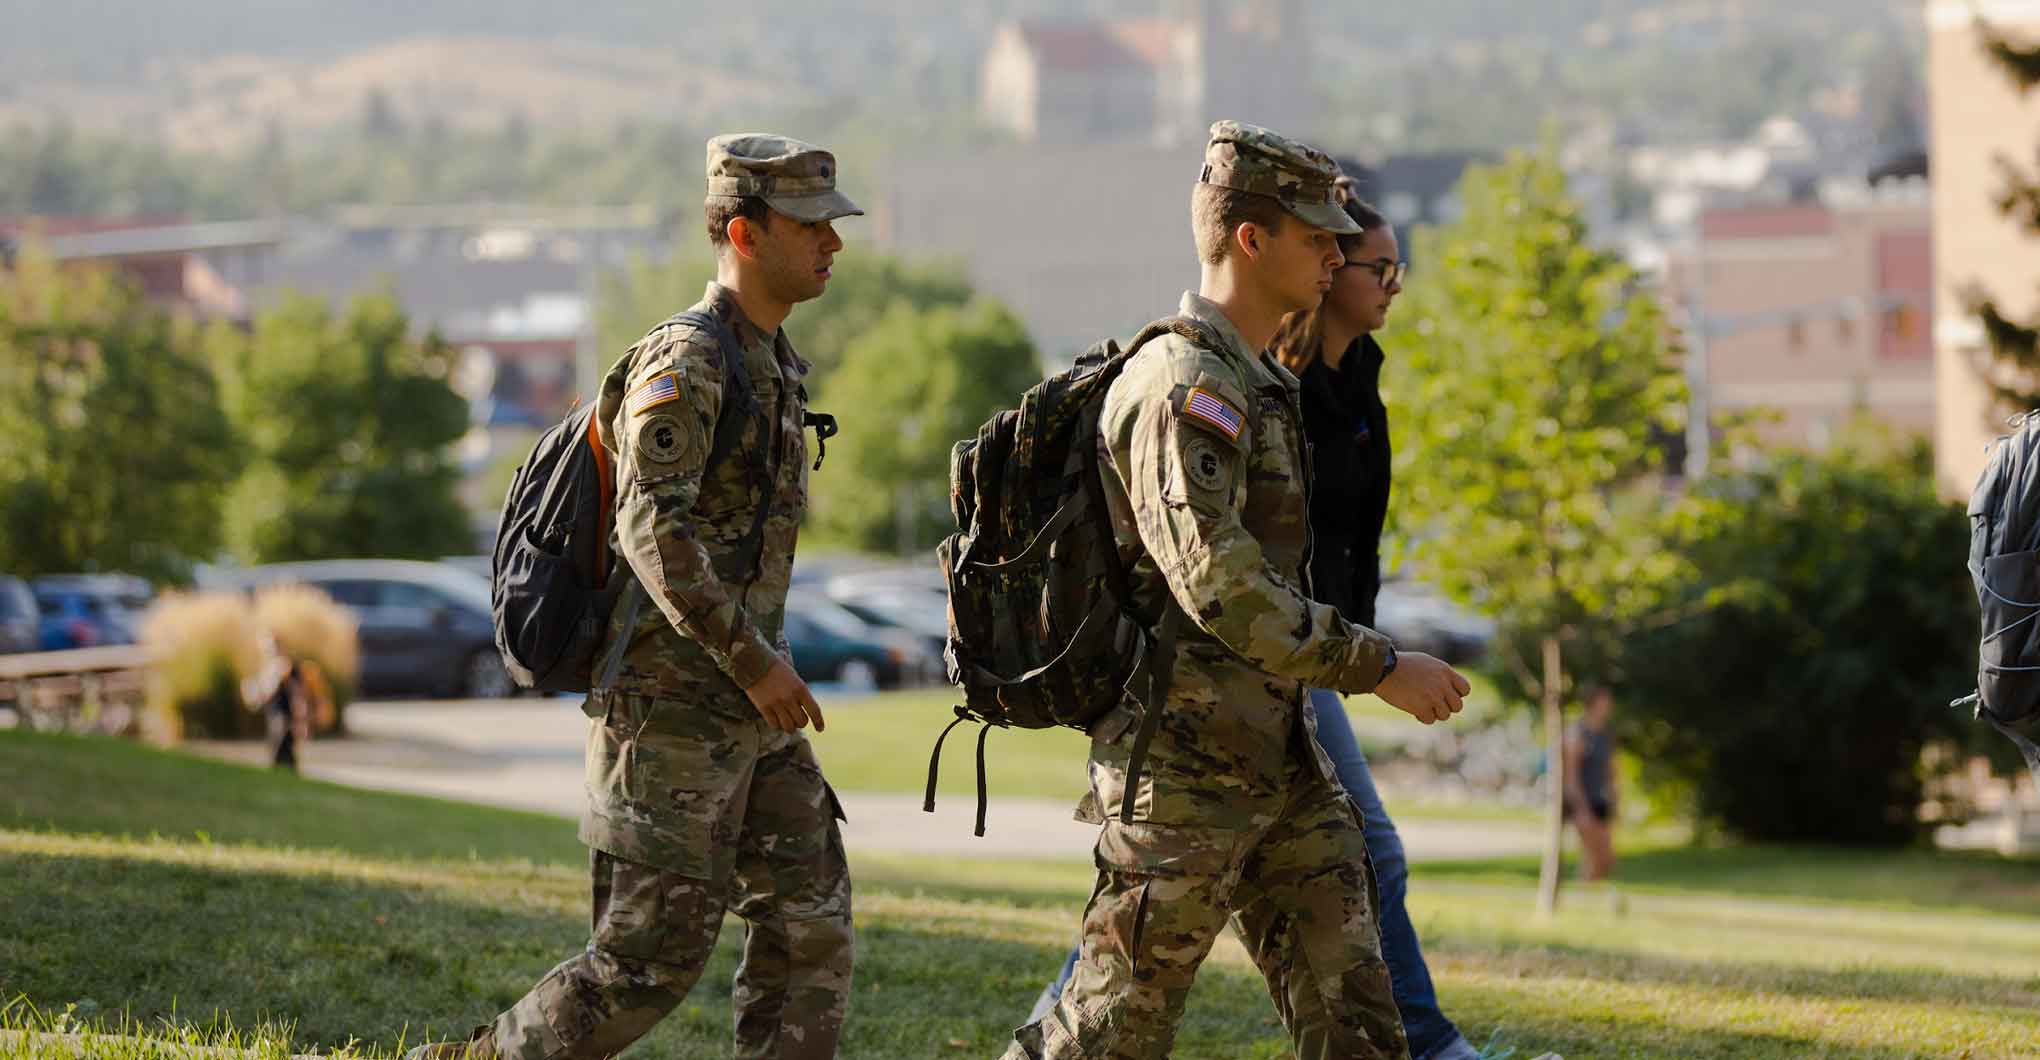 ROTC Students walking on campus